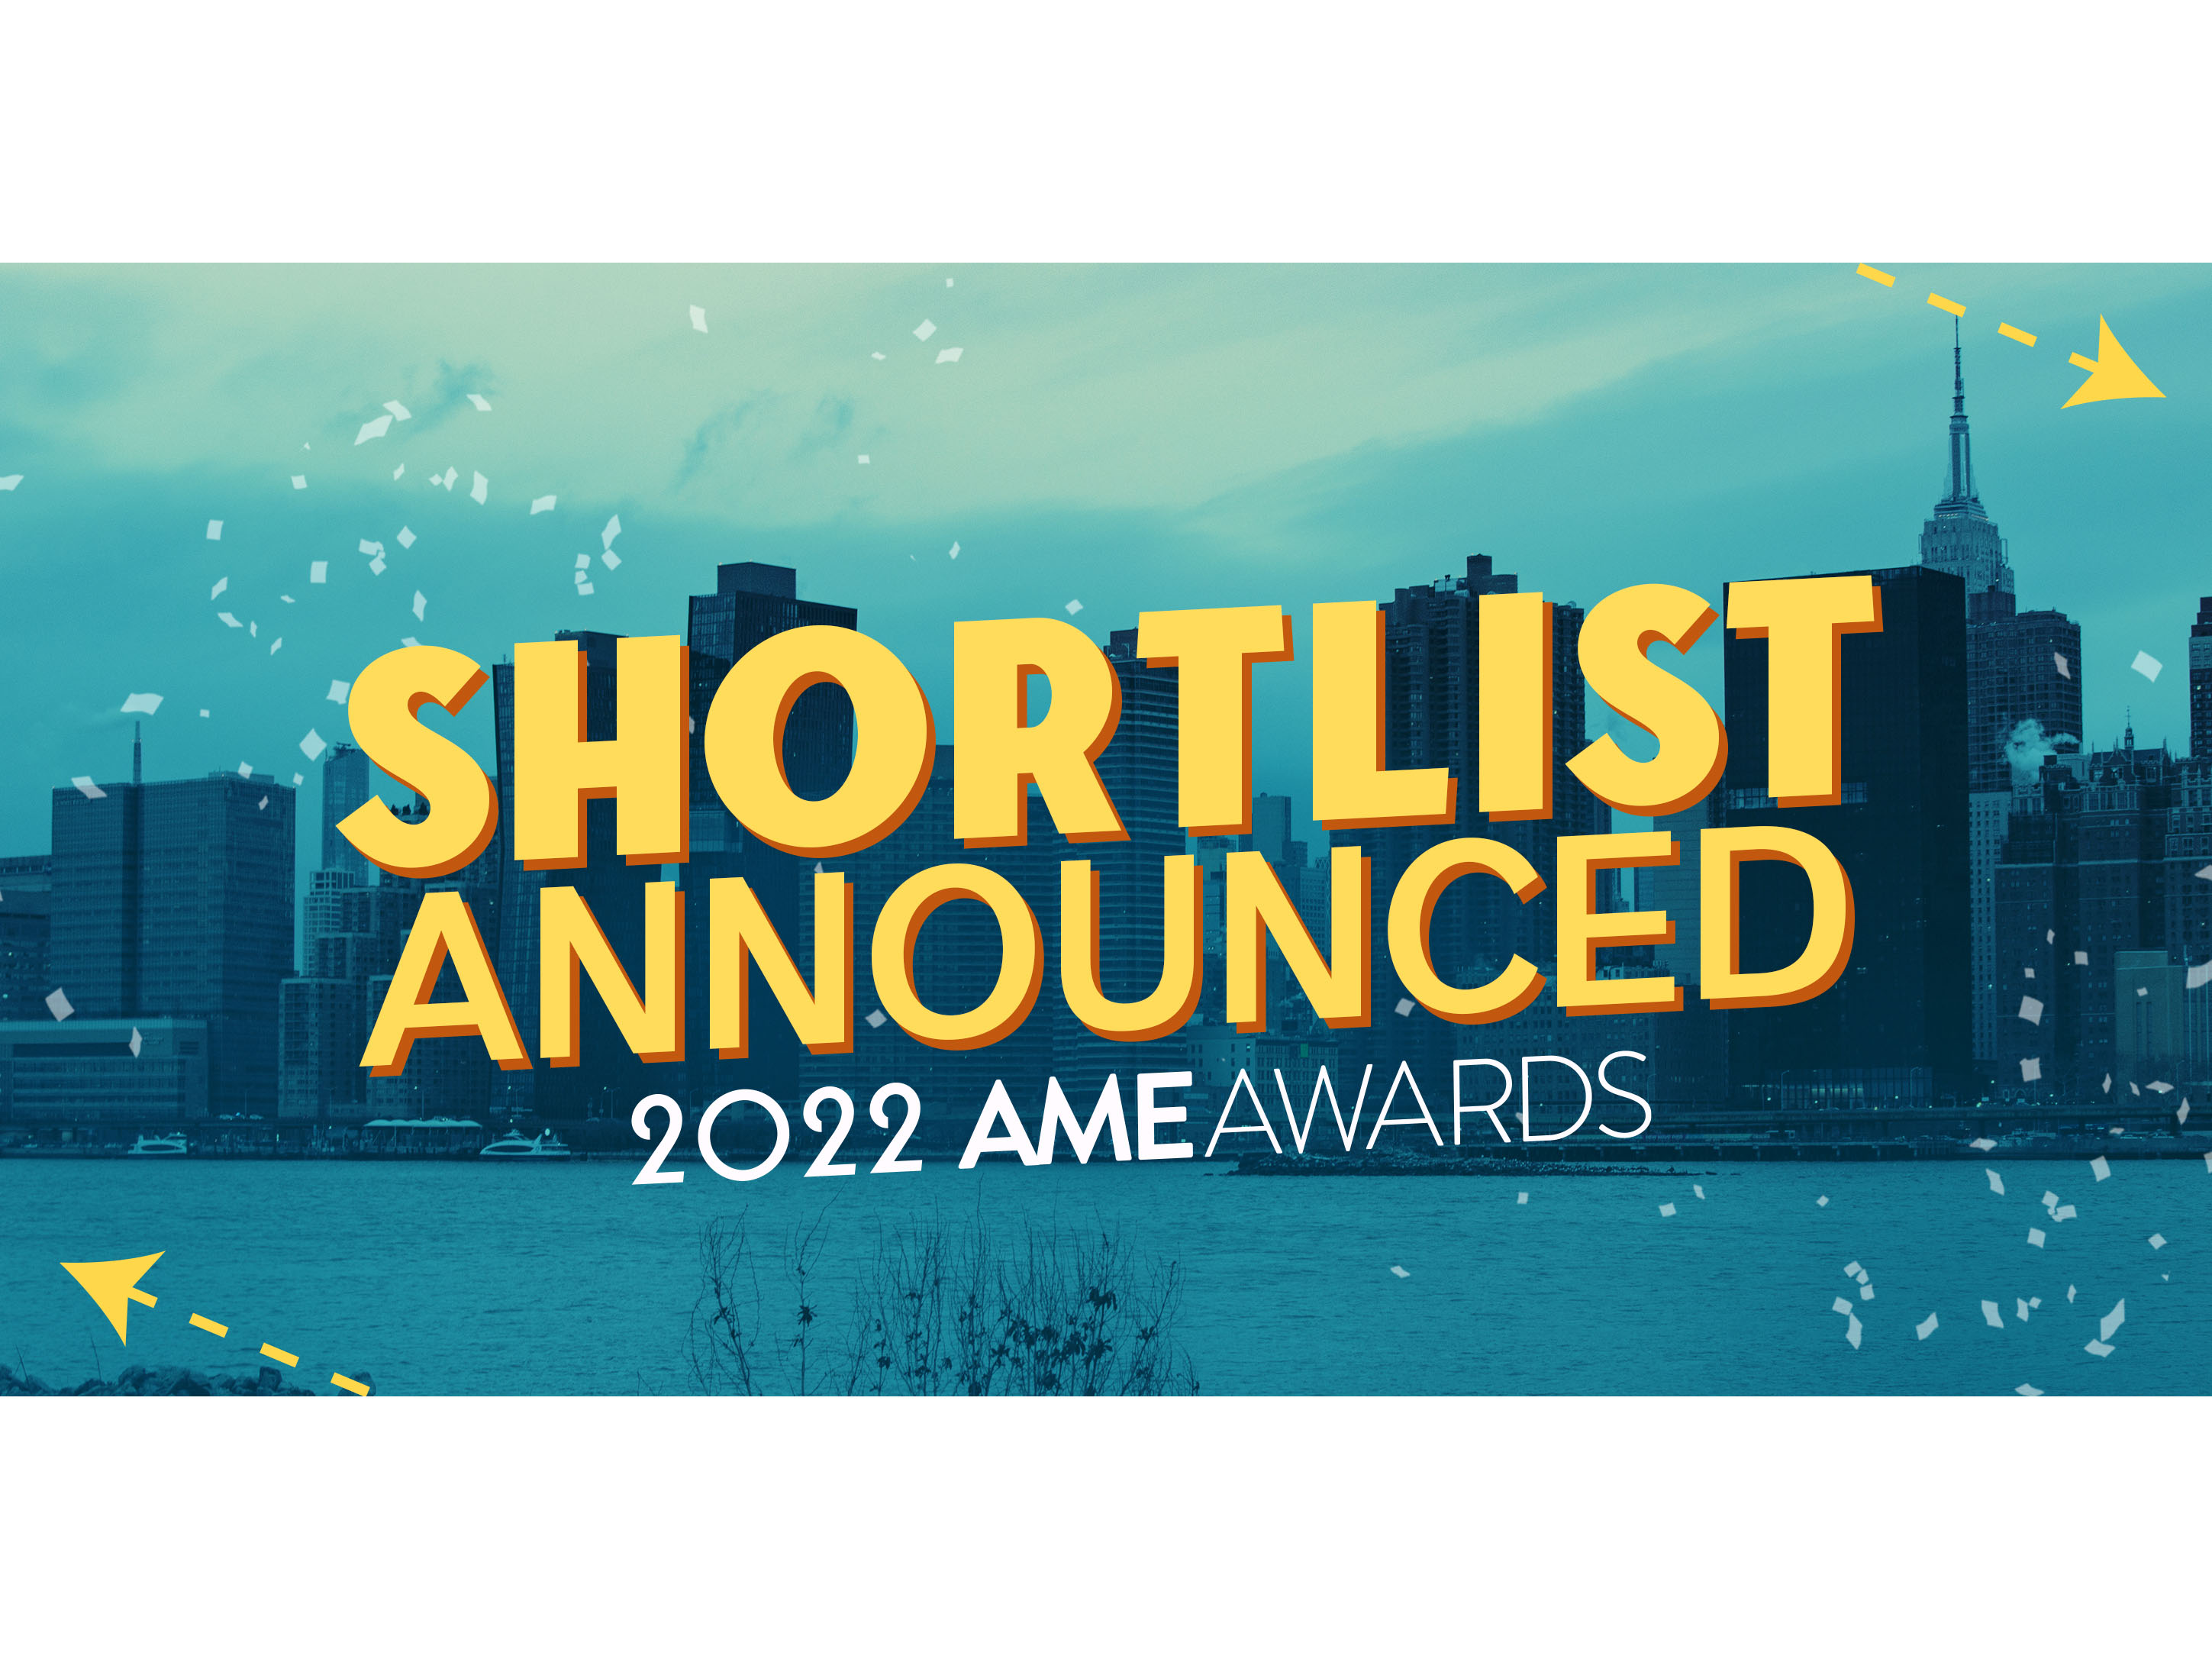 NYF 2022 AME Awards Shortlist is out: The UAE Government Media Office takes top slot worldwide with 34 entries shortlisted